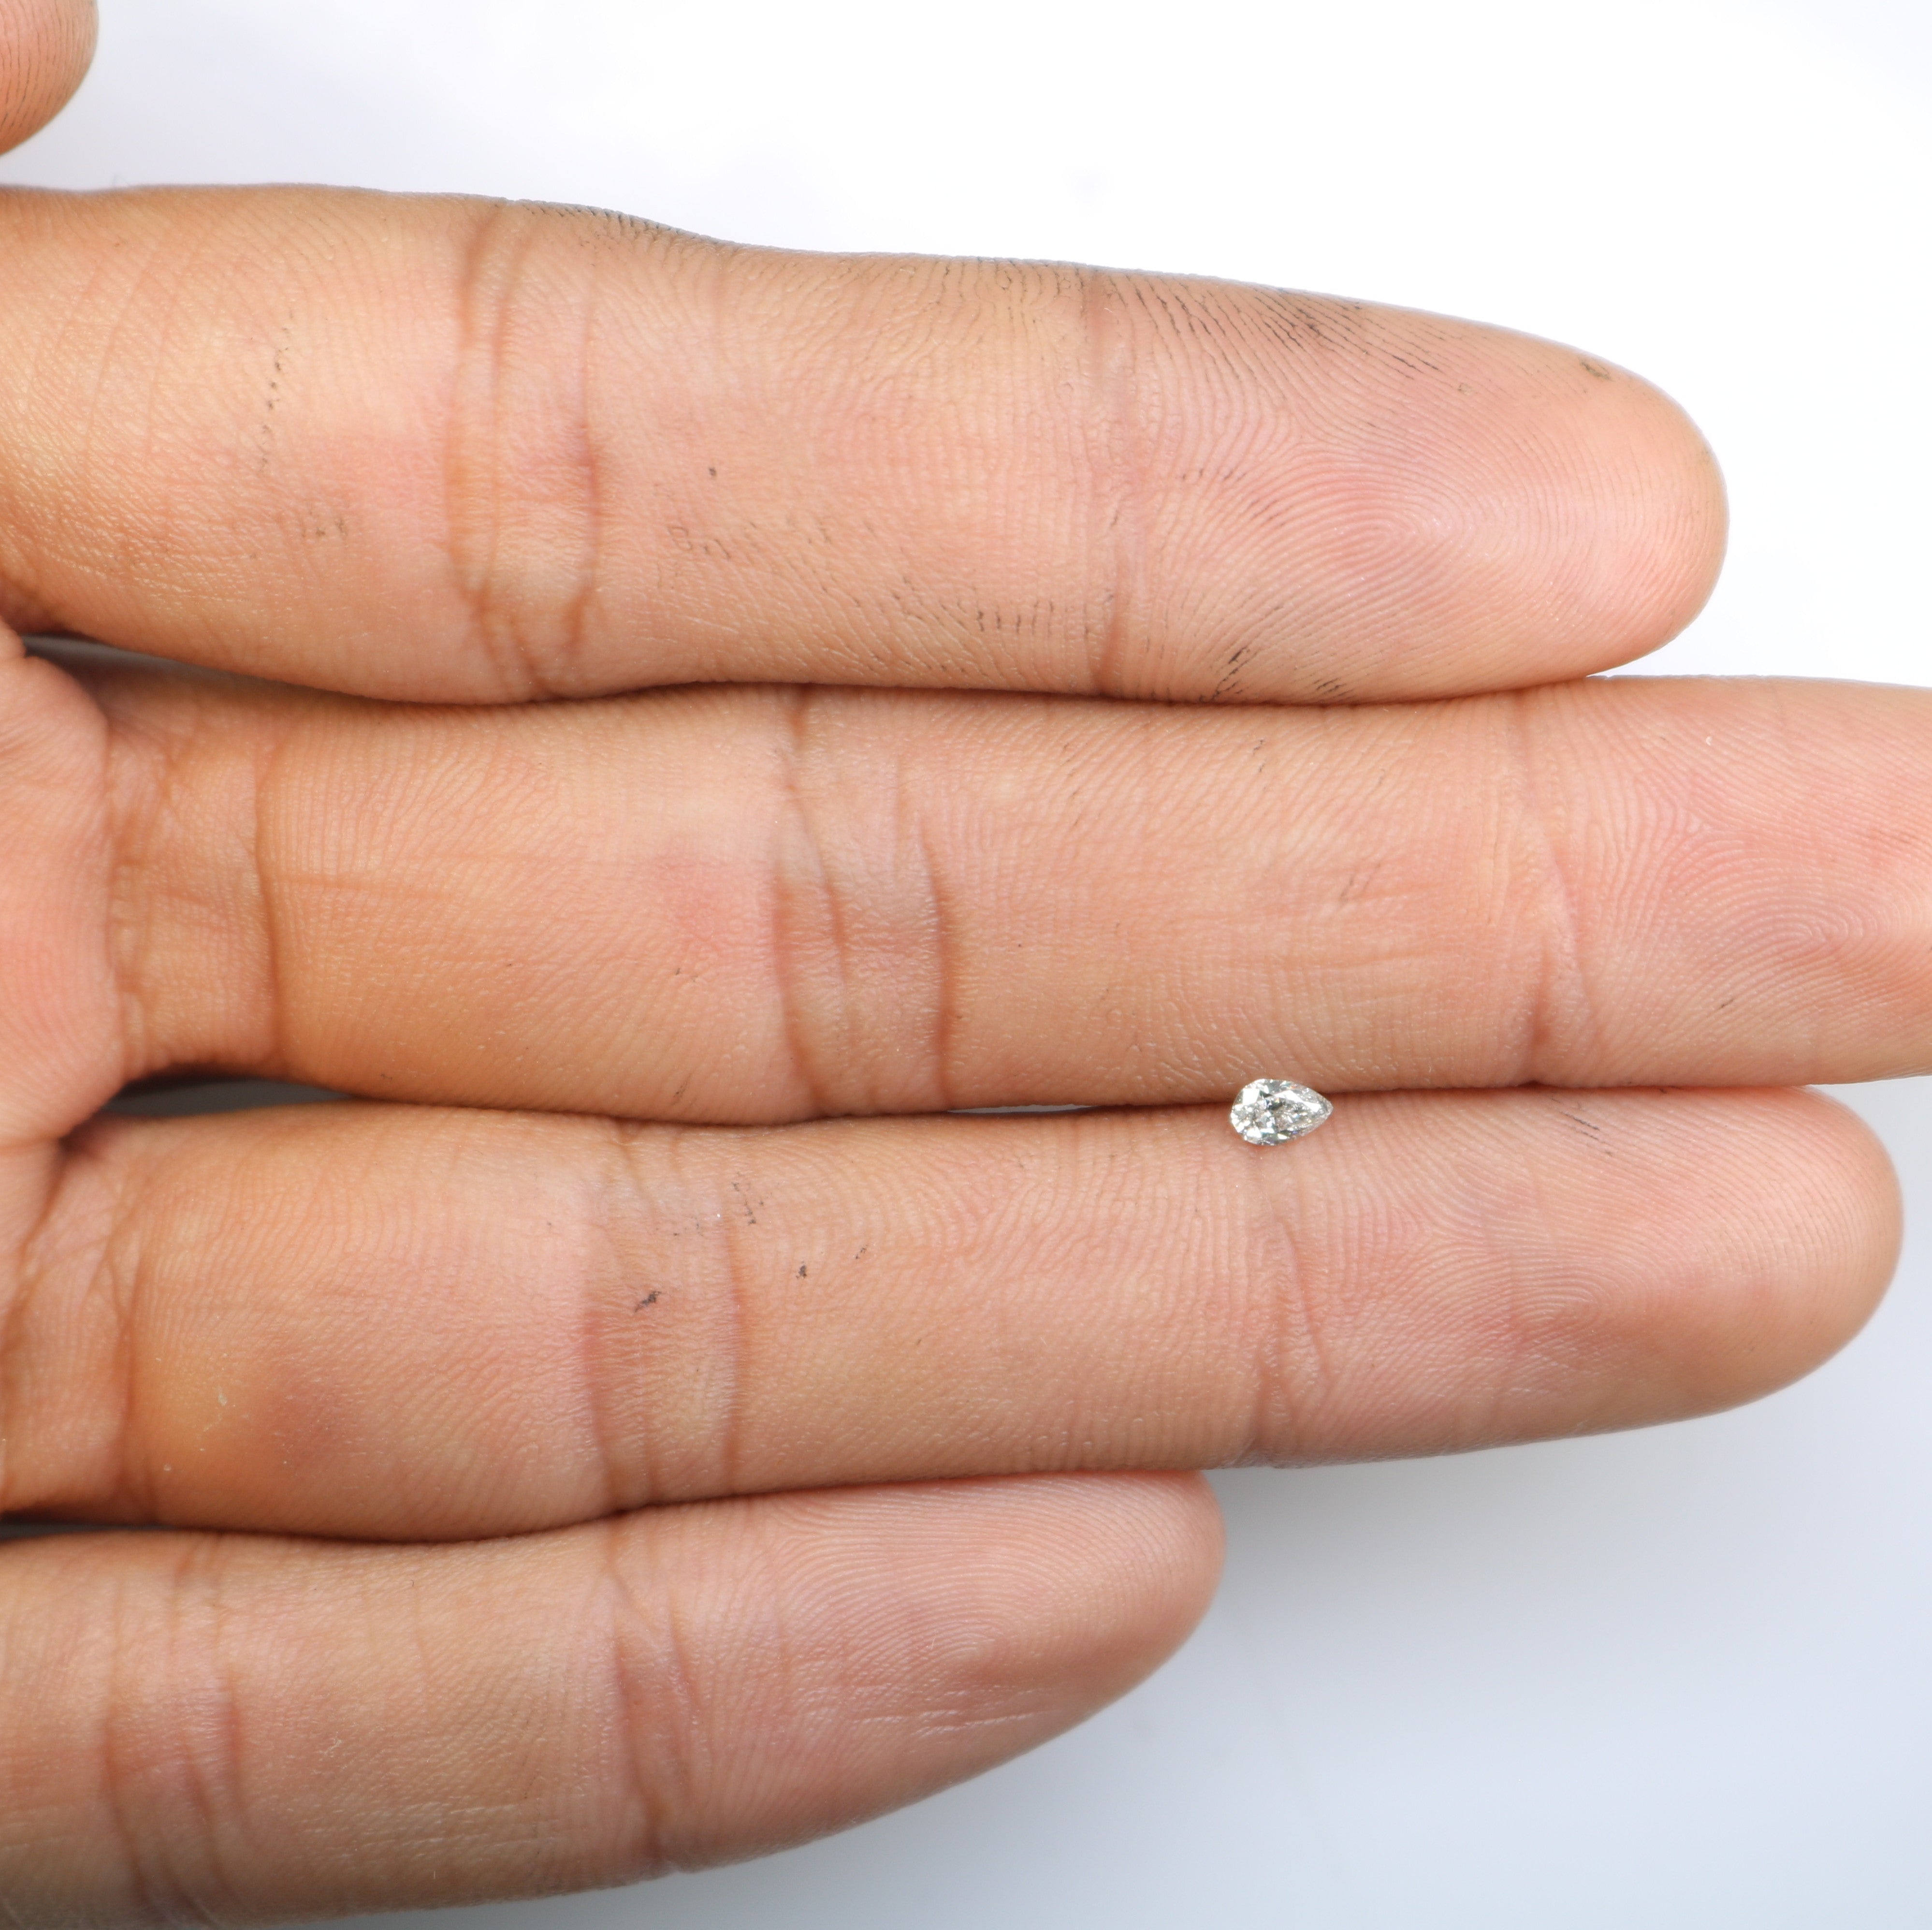 0.15 CT Salt And Pepper Pear Shape Diamond For Engagement Ring